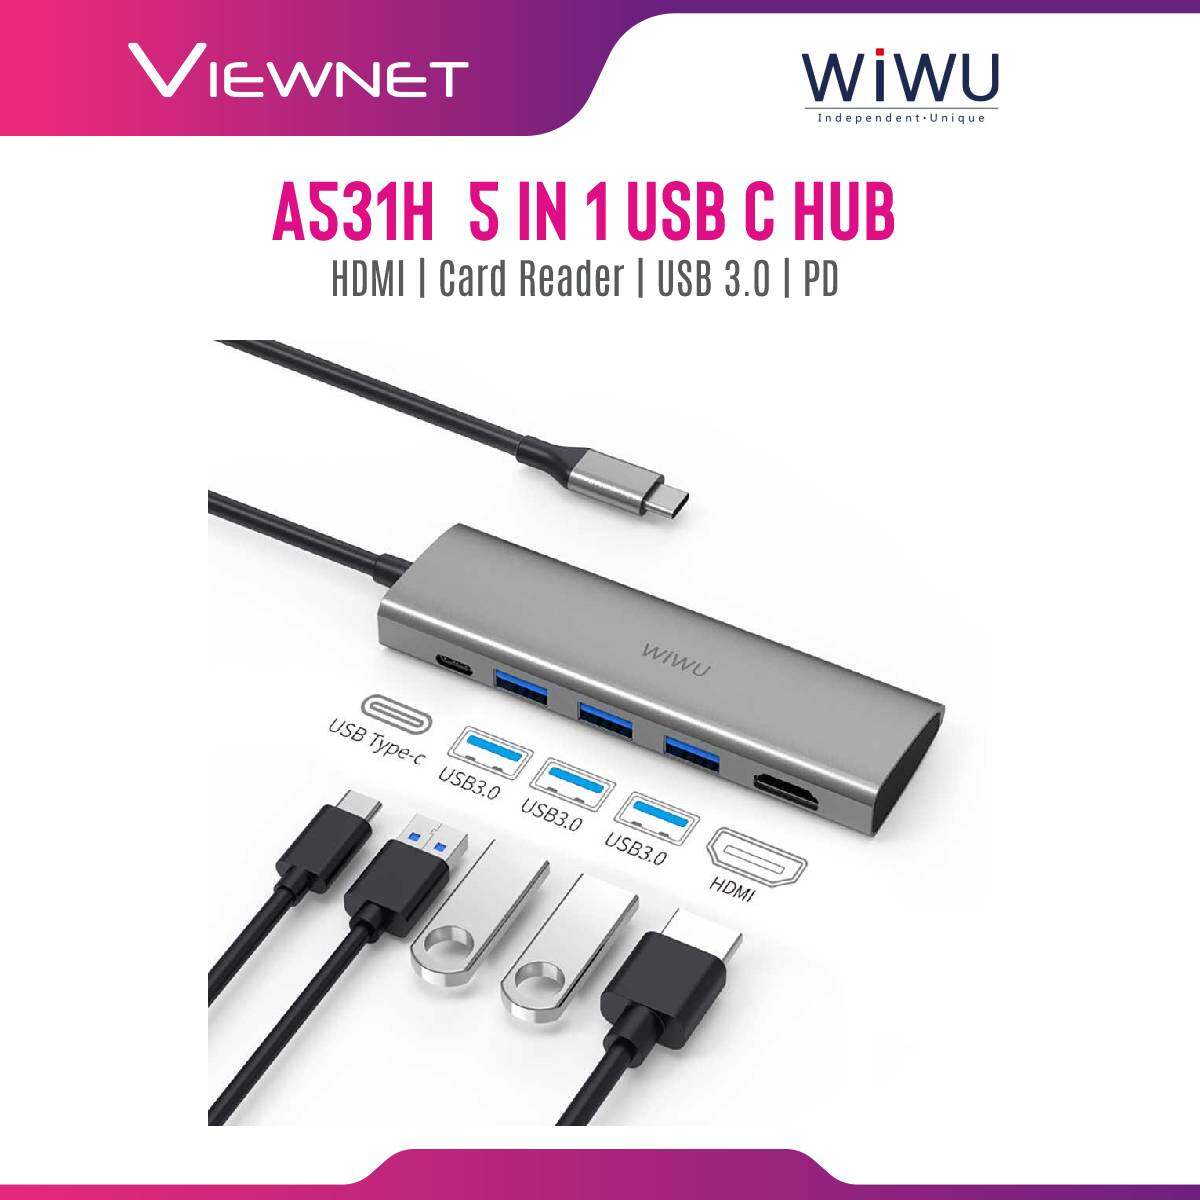 WIWU A531H  5 in 1 USB C Hub for  MacBook Pro 13 16 2020 2019 2018 Multi-function USB 3.0 PD Power for MacBook Air 13 Type-c to HDMI for Computer Accessories